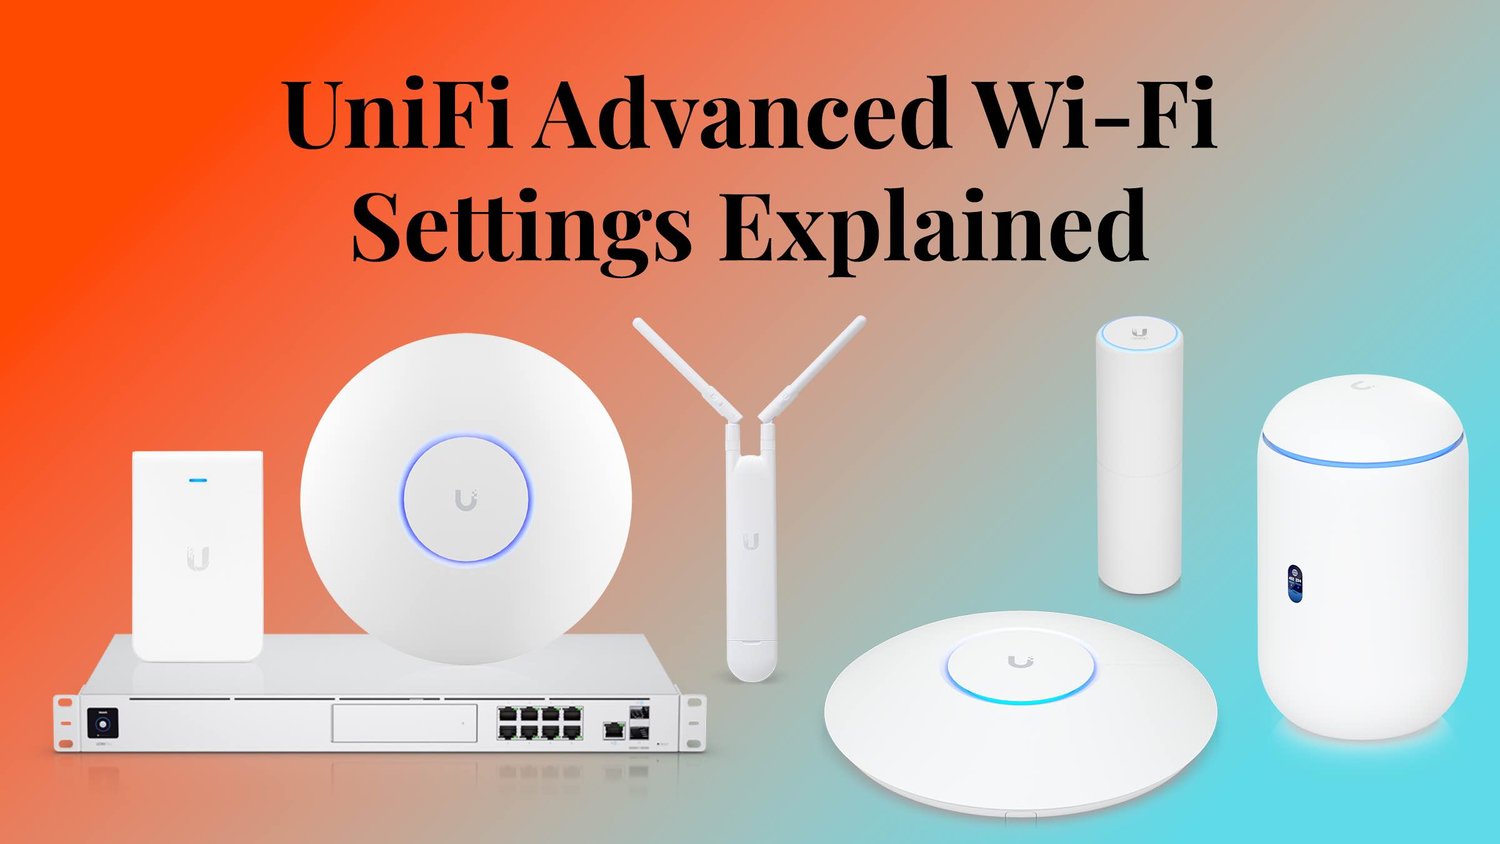 How to Setup RoWifi on Discord Tutorial (Official) 